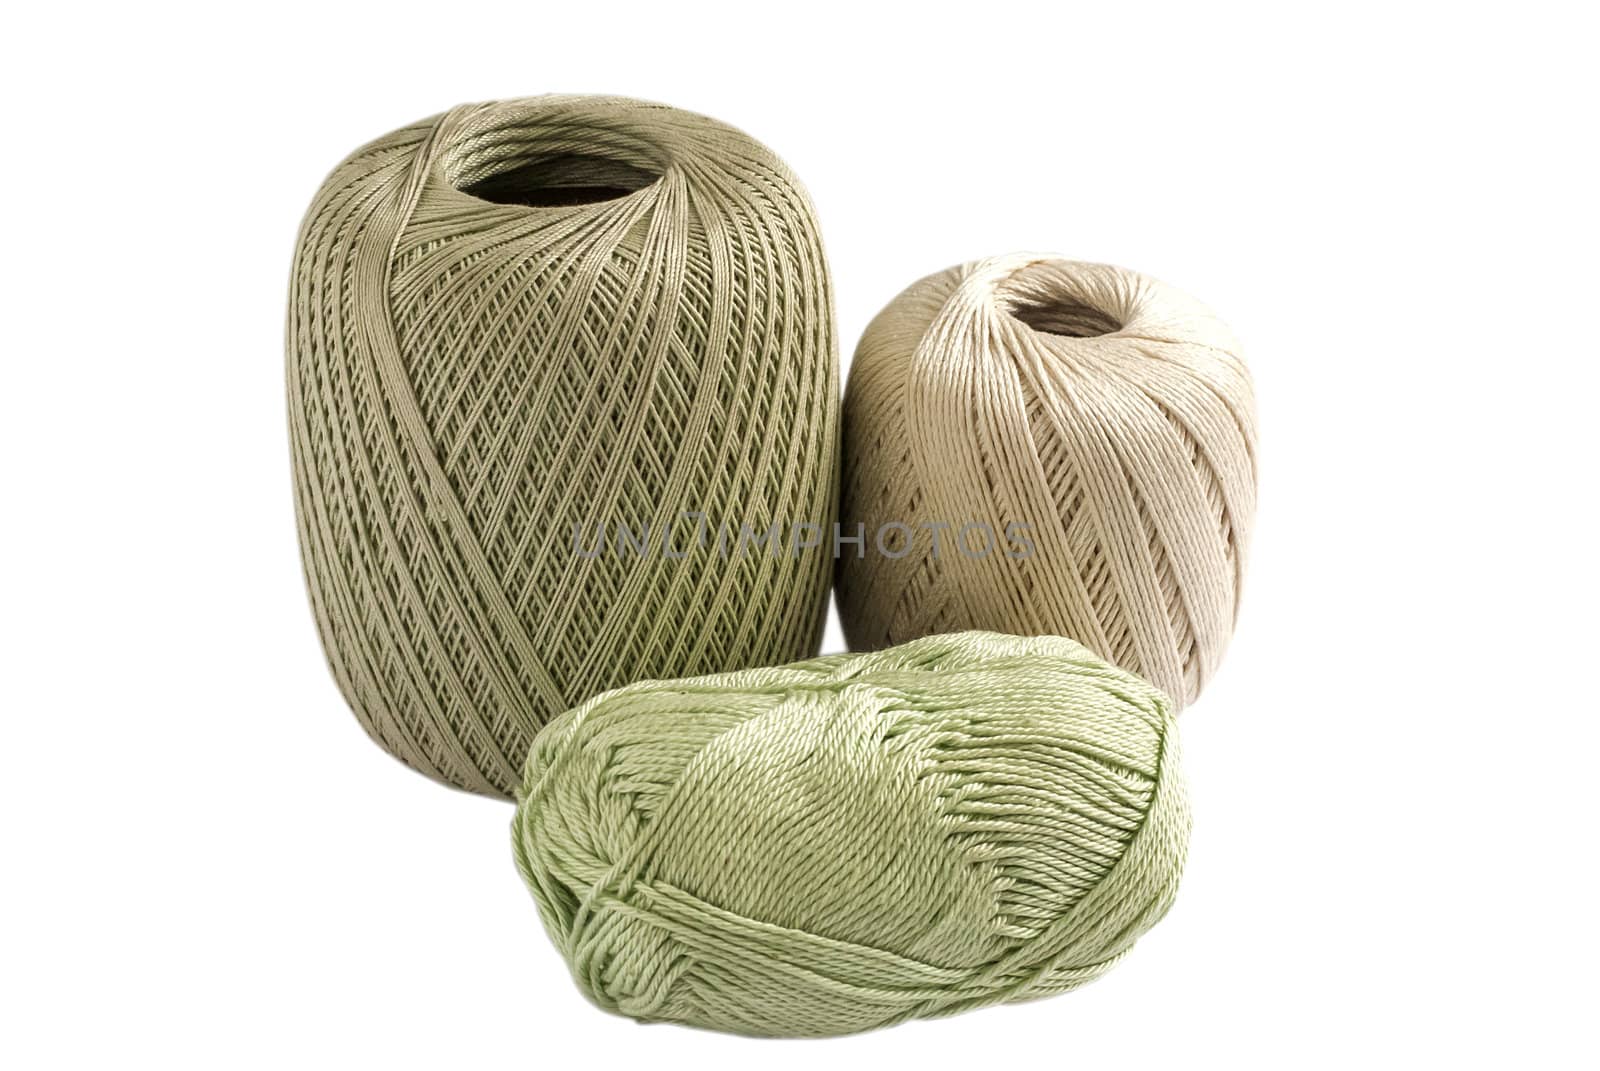 Three skeins of yarn for knitting isolated on white background